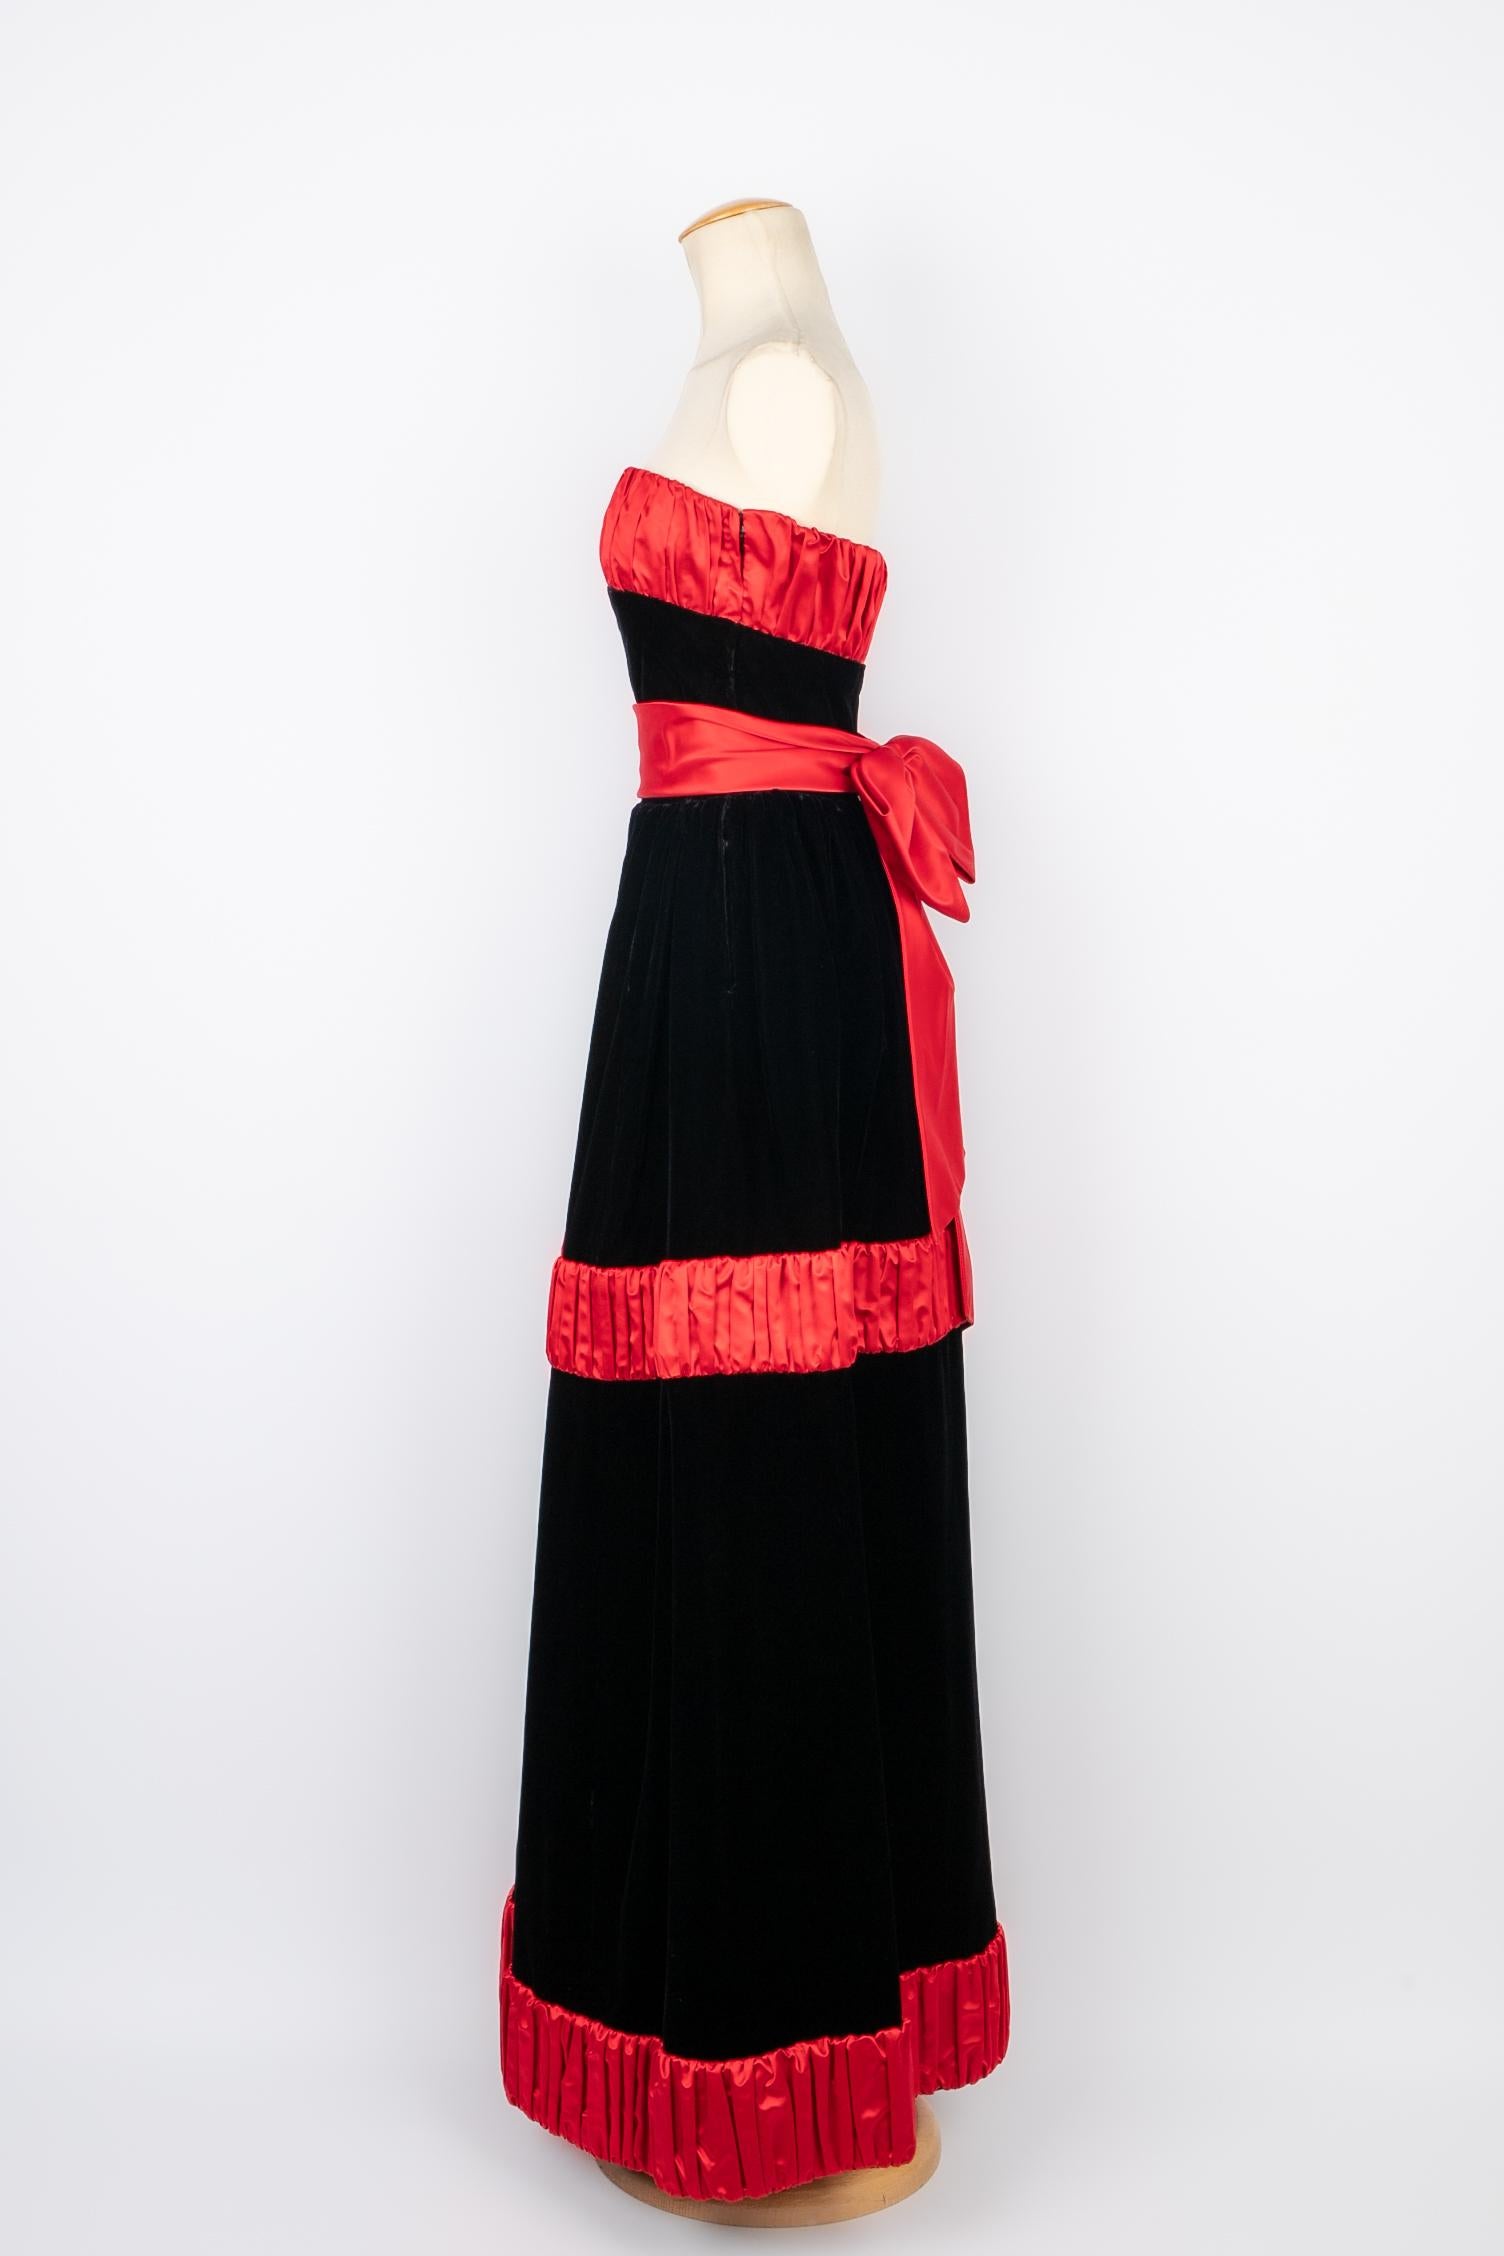 Women's Givenchy Haute Couture dress For Sale